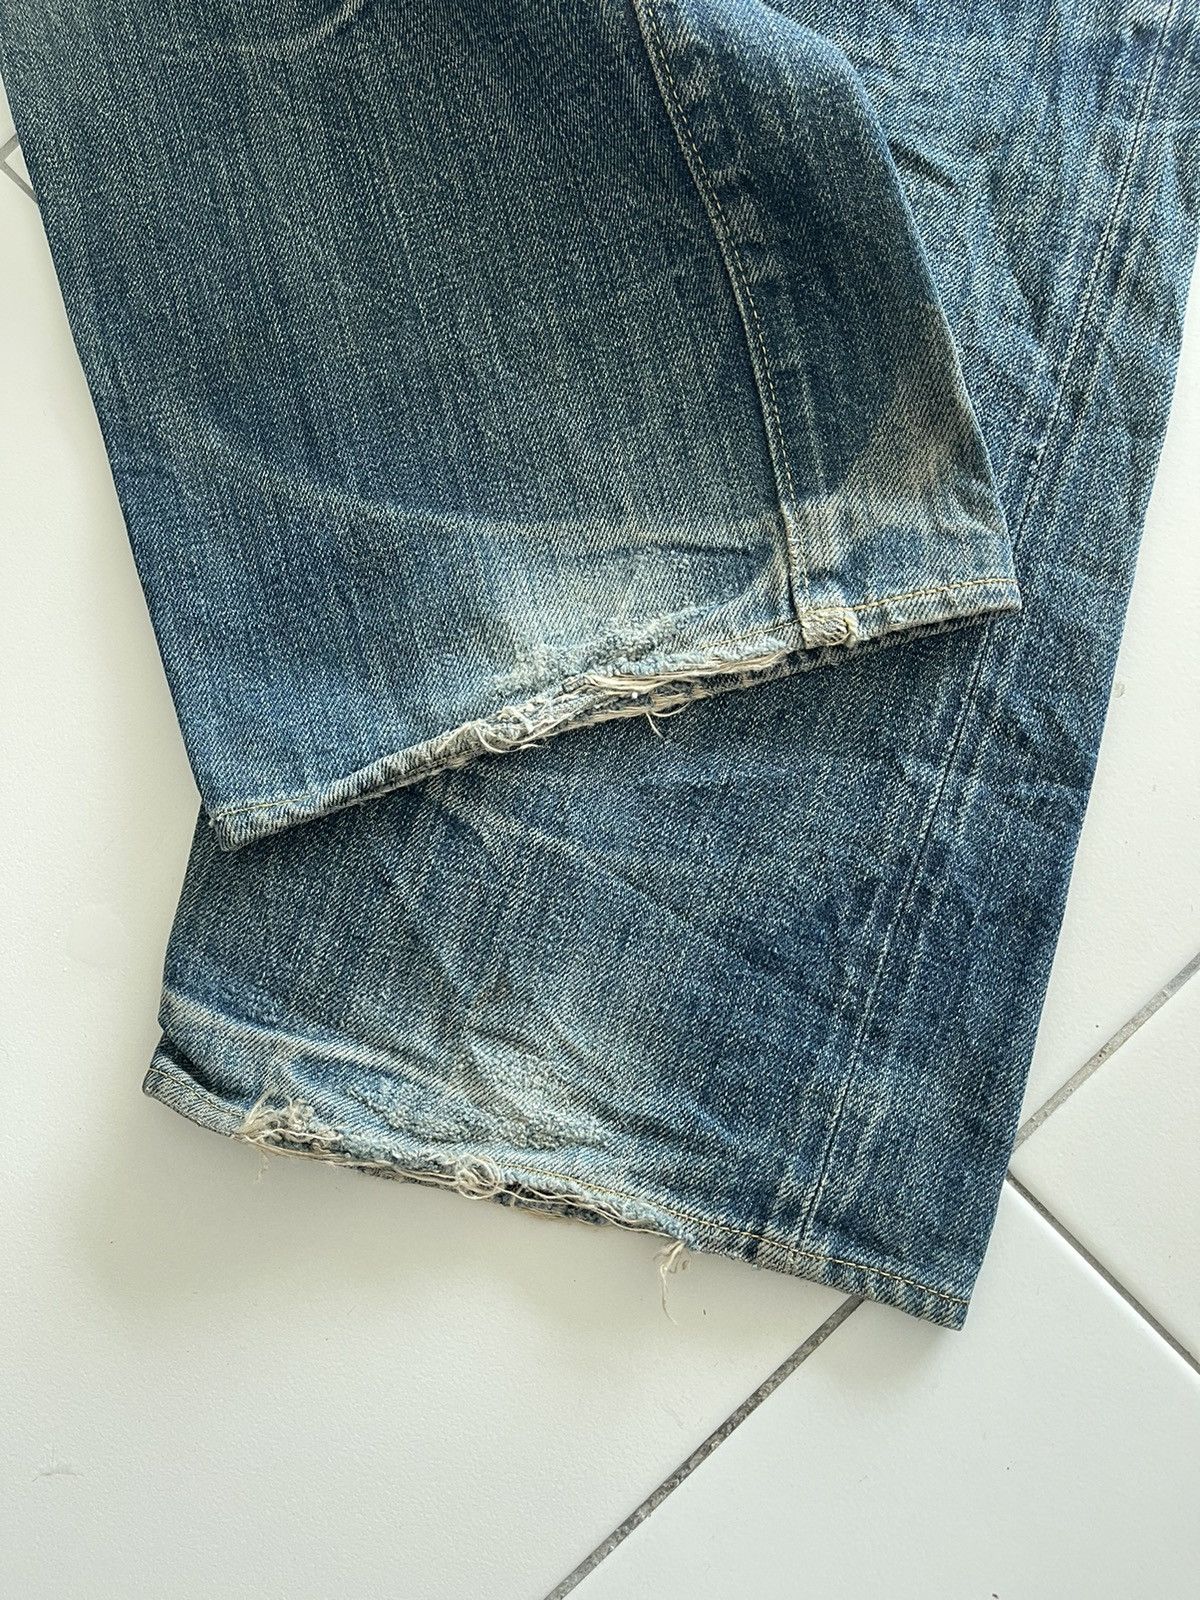 Japanese Brand - JAPANESE REPRO DENIM JEANS, BARNS OUTFITTERS & CO BRAND - 5